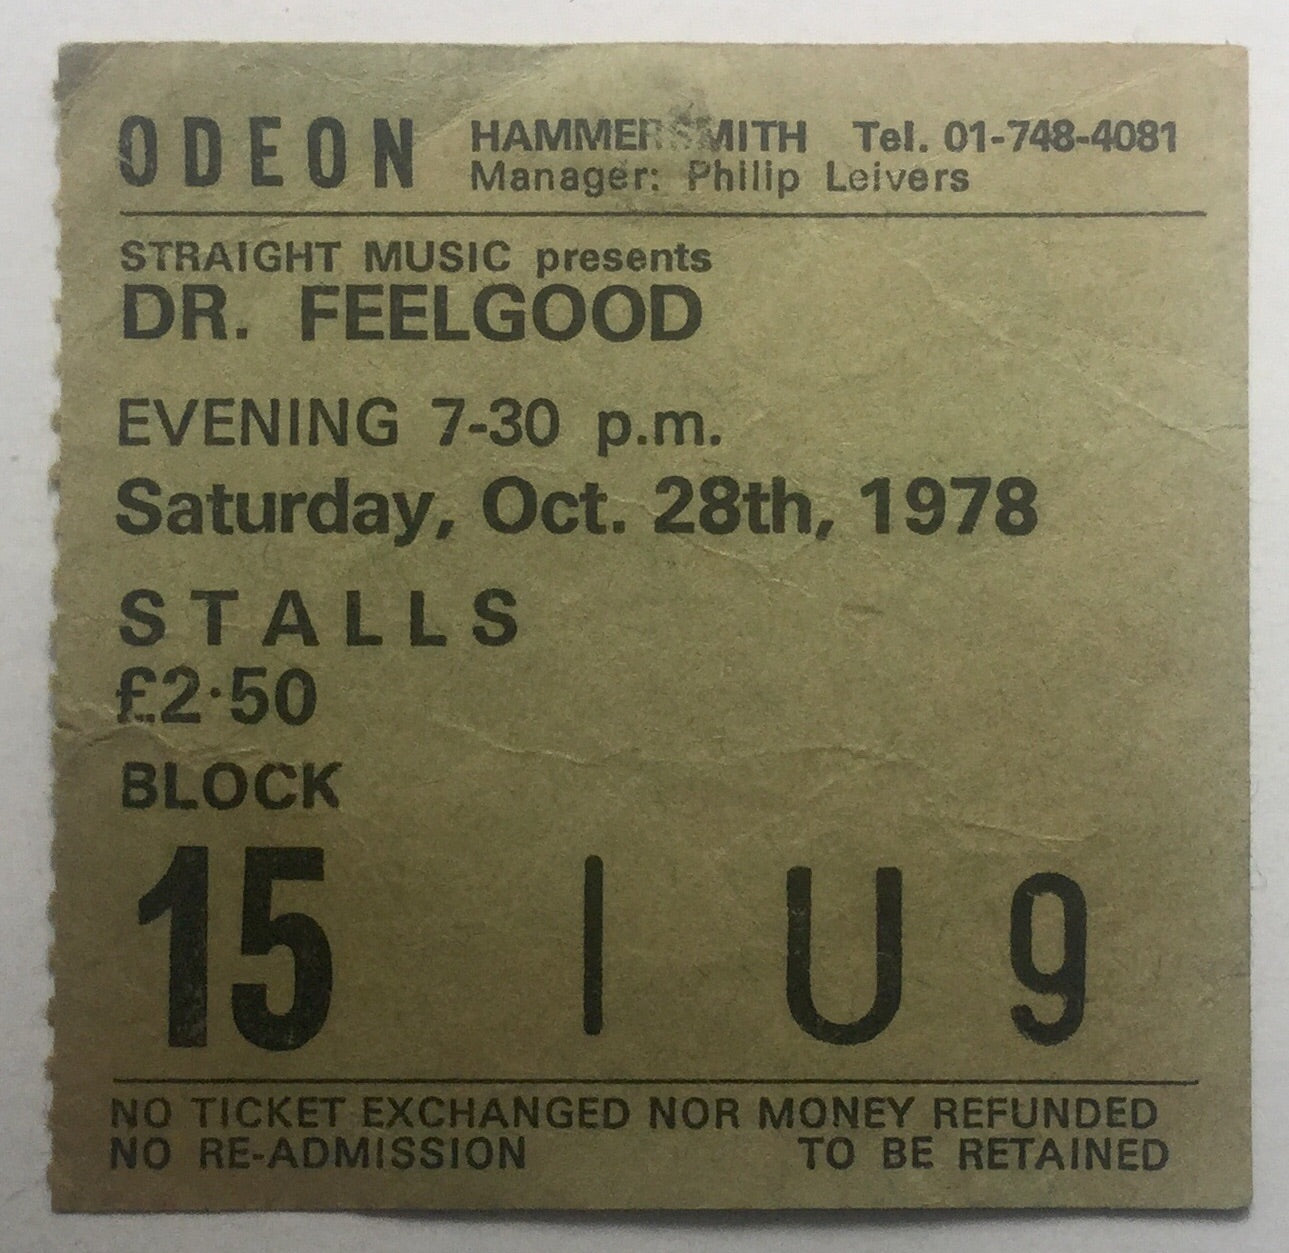 Dr Feelgood Original Used Concert Ticket Hammersmith Odeon London 28th Oct 1978